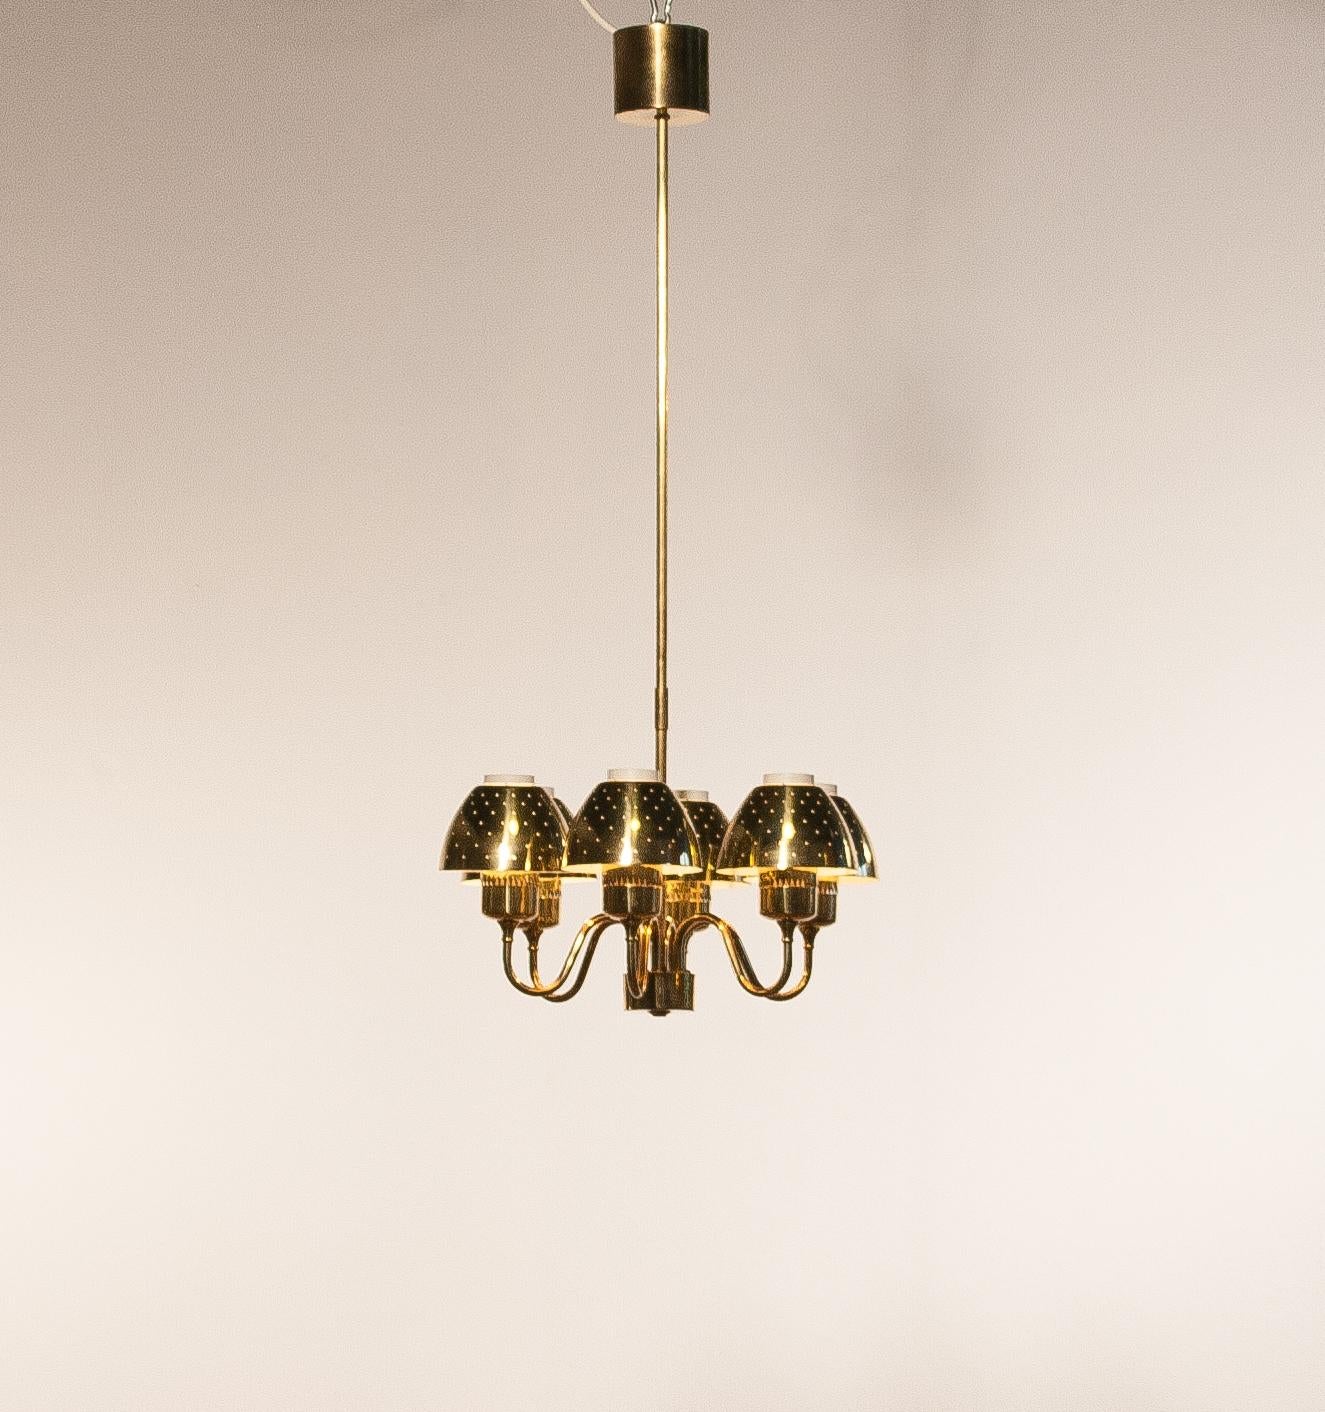 Beautiful chandelier in excellent condition.
Designed by Hans-Agne Jakobsson.
Manufactured by Markaryd.
Period 1960-1969.
The dimensions are H 80cm, ø 40cm.
 